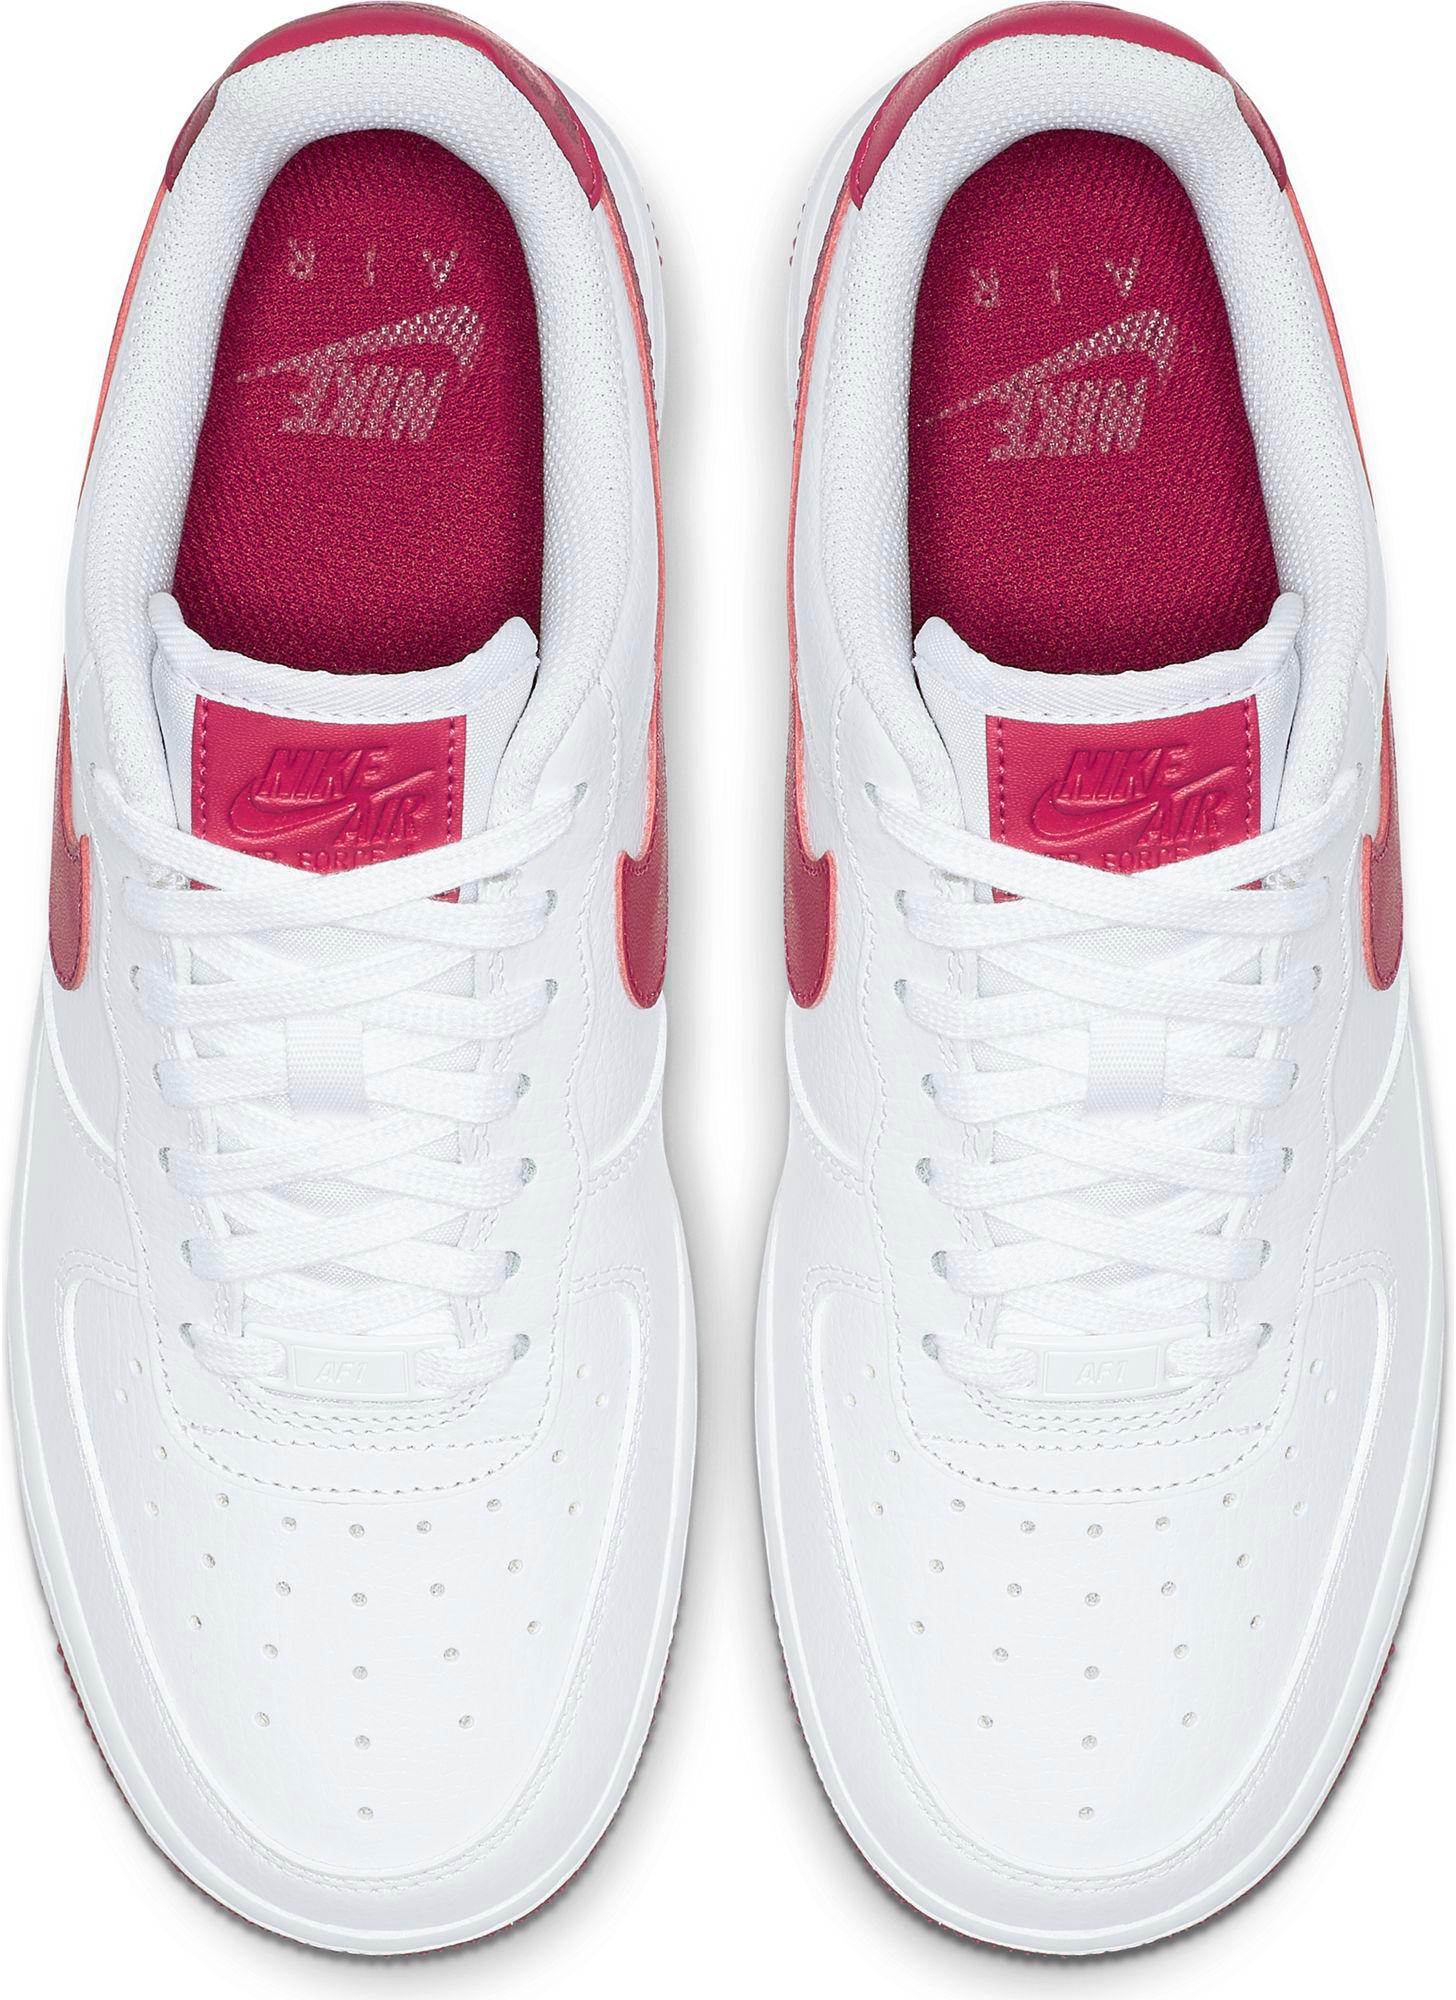 nike air force 1 white noble red